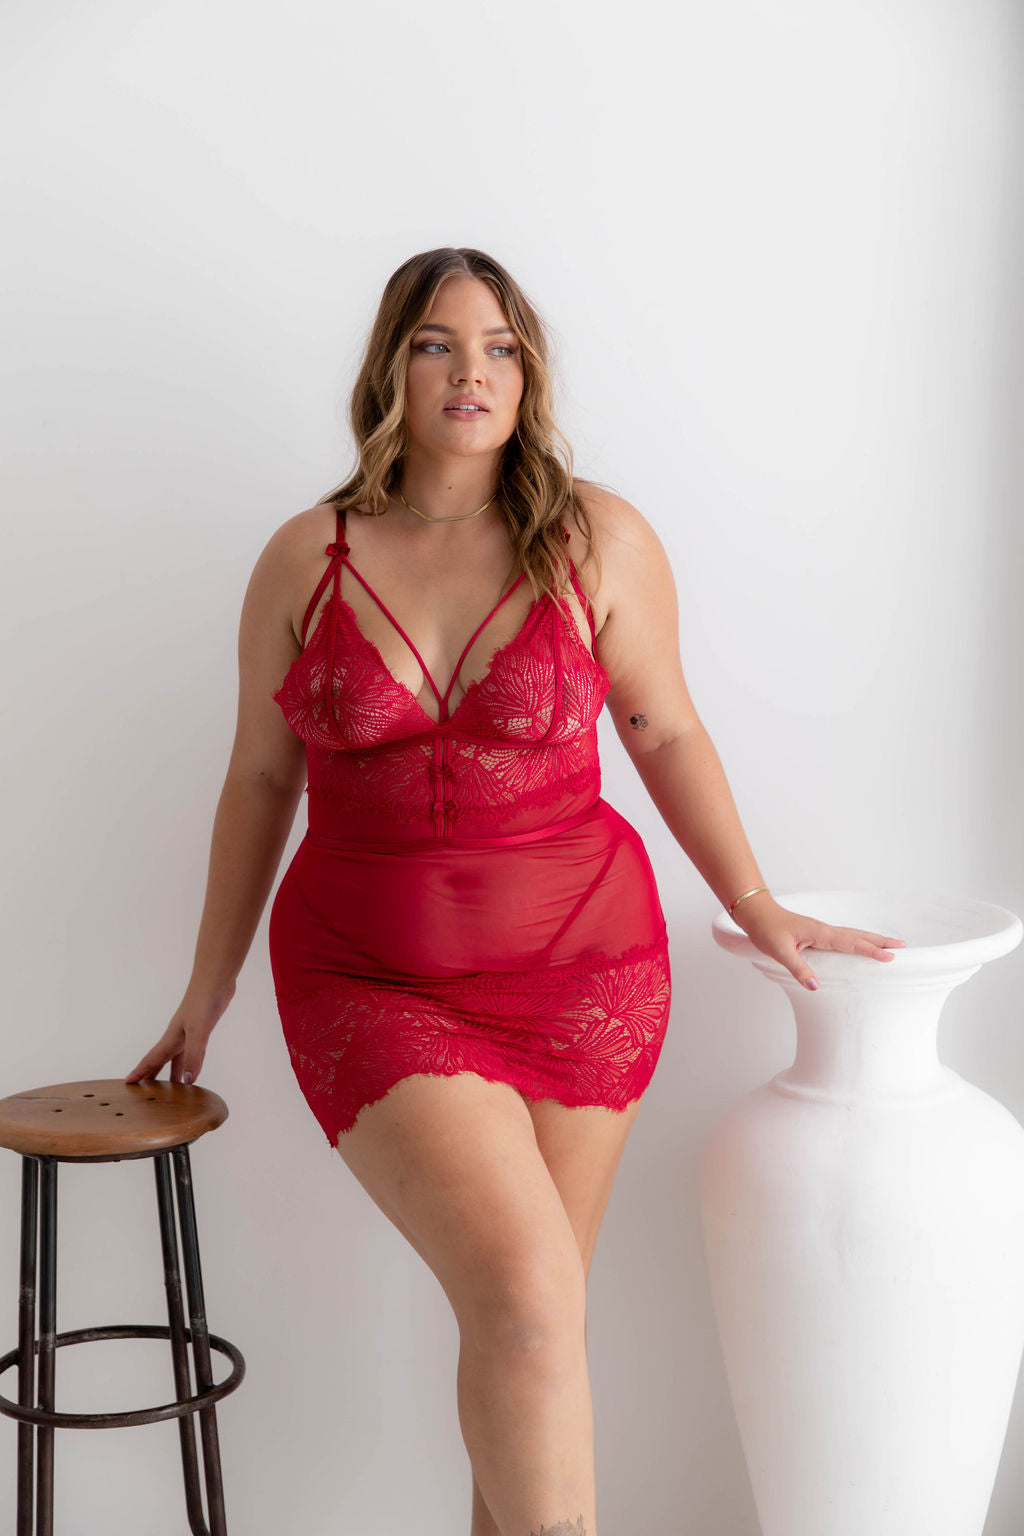 Marbella Red Lace Chemise - $66.00 - Babydoll - Naked Curve